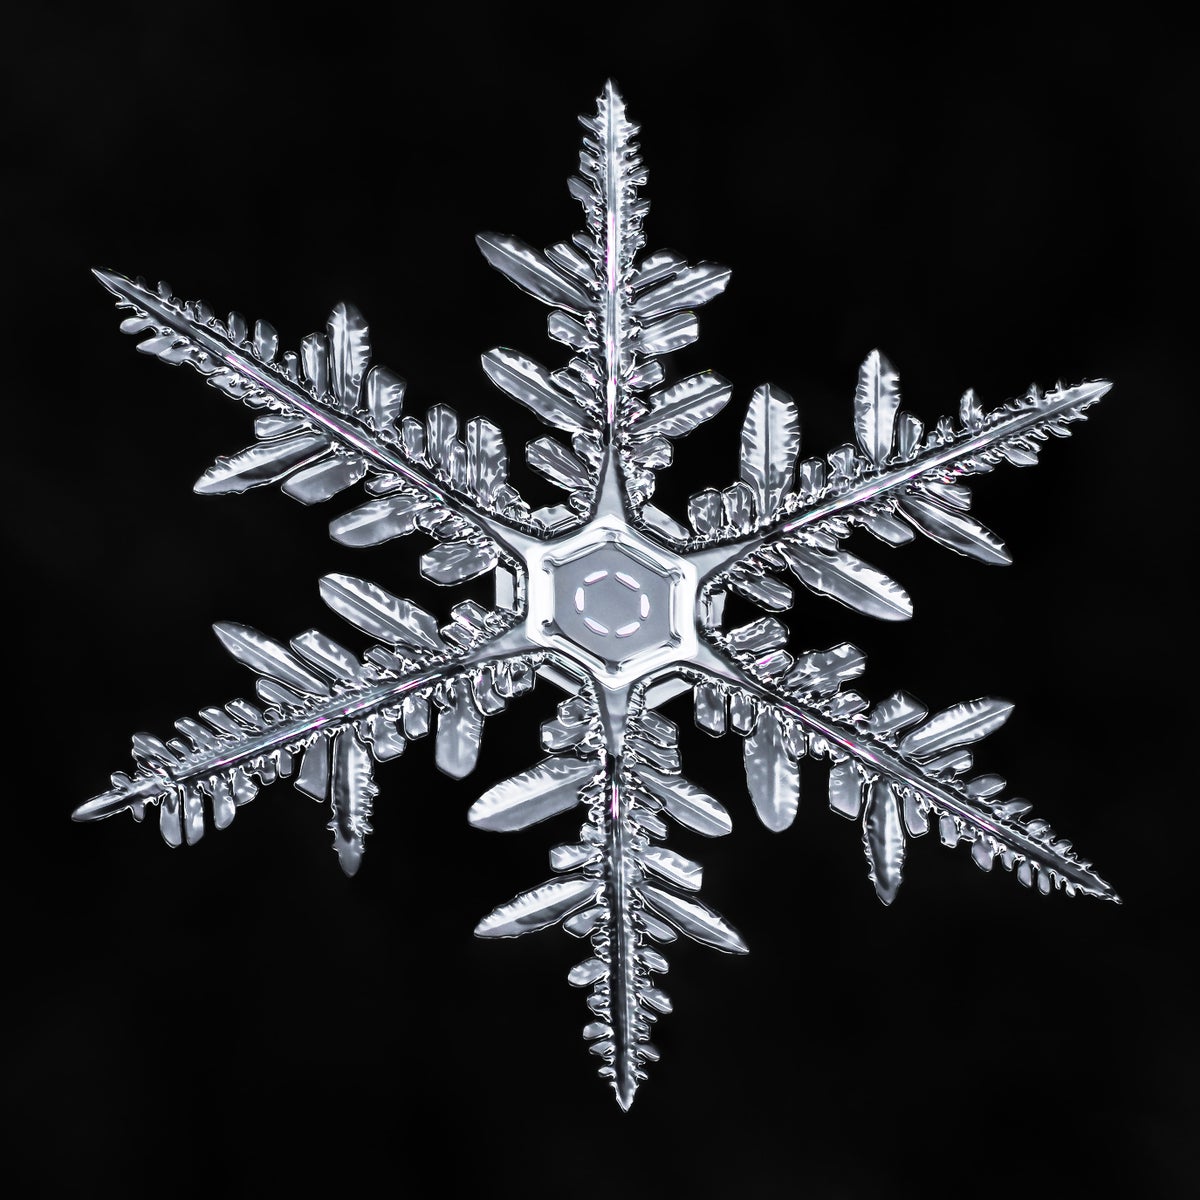 Plate snowflake that turned into a stellar dendrite.